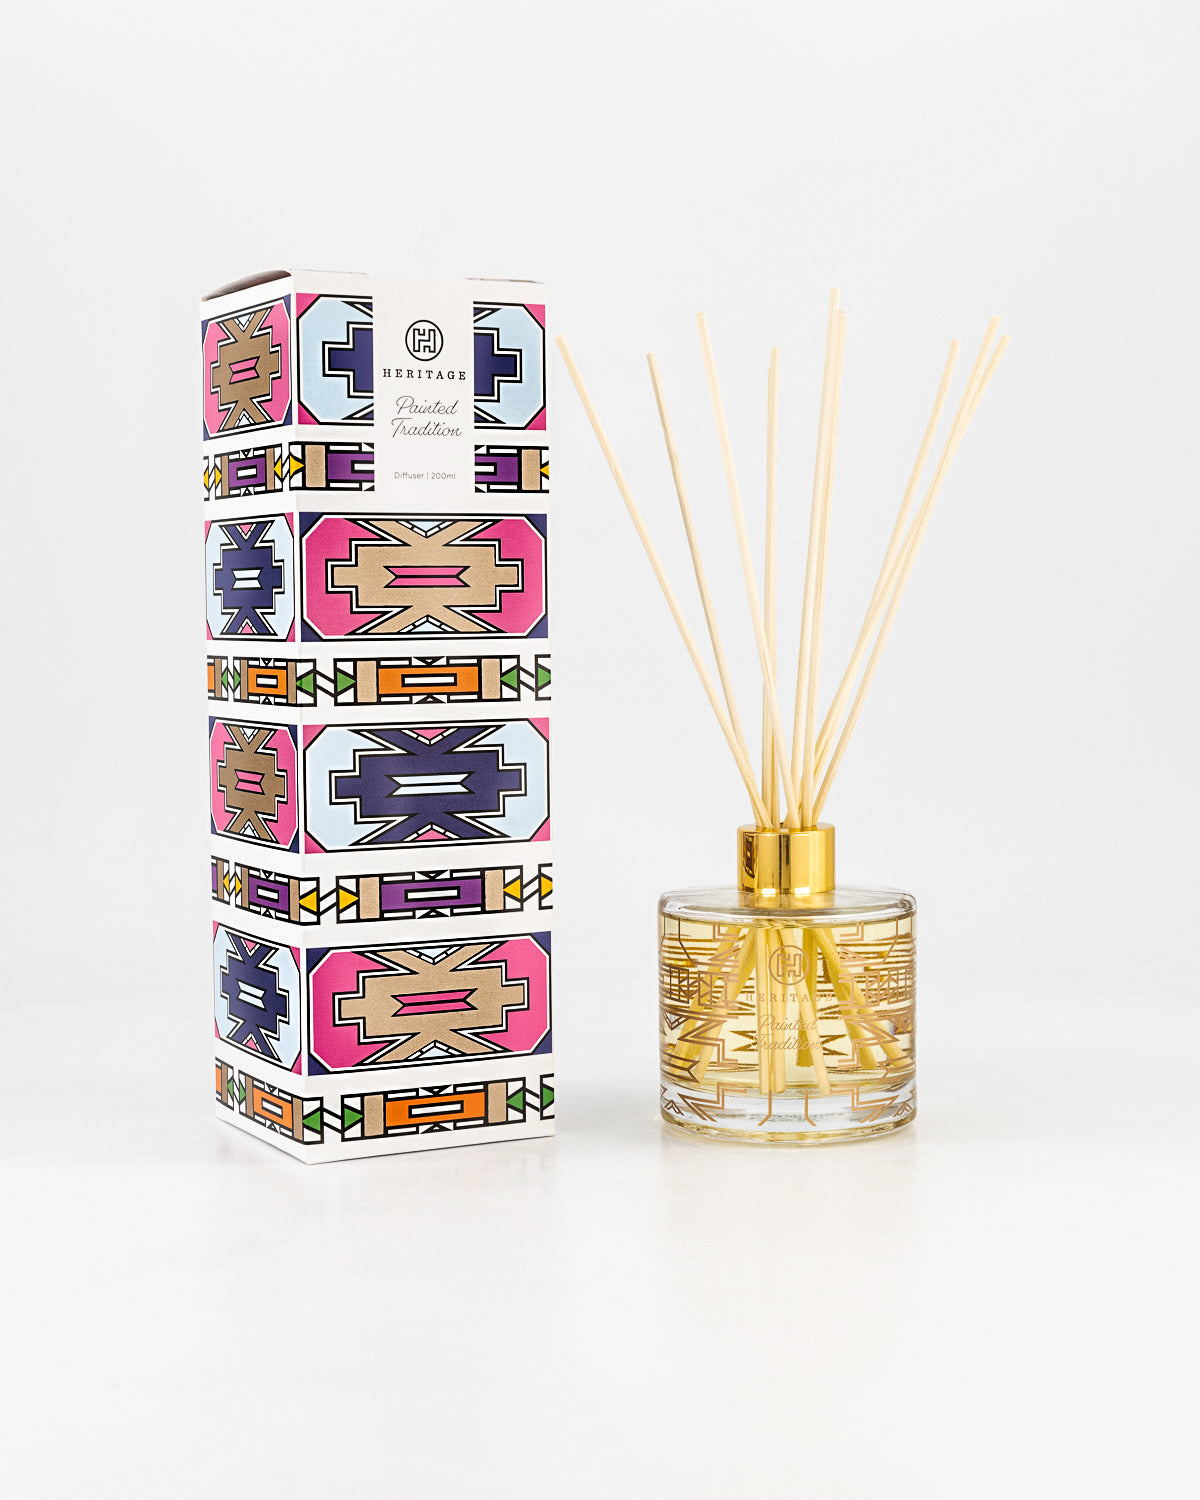 HERITAGE COLLECTION PAINTED TRADITION 200ML DIFFUSER